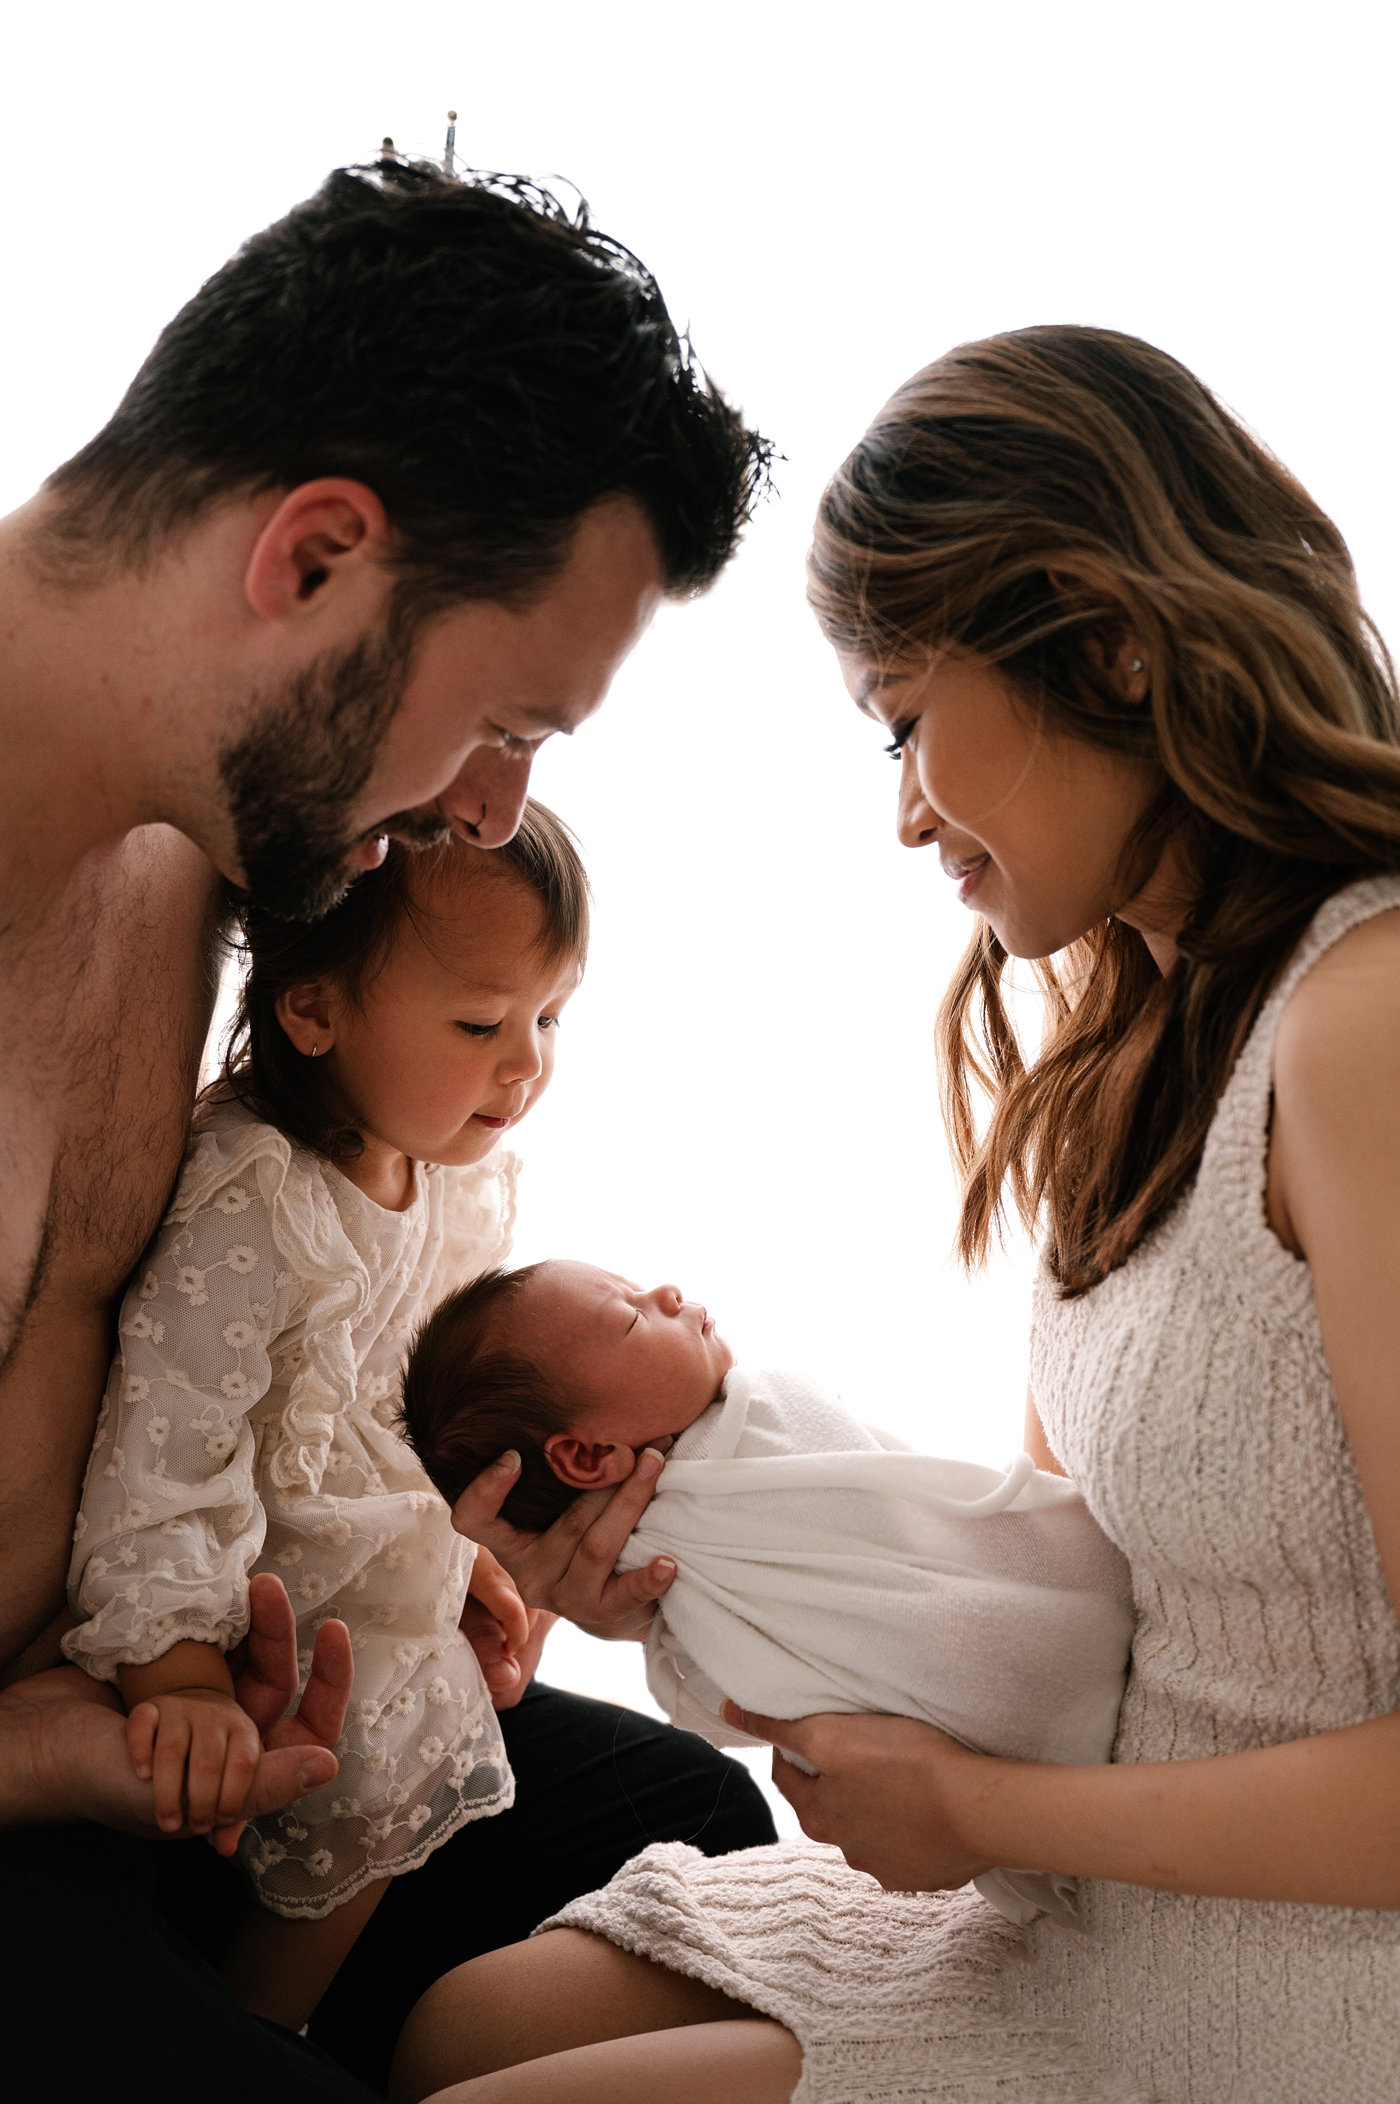 Proud family gazes at son during Tacoma newborn session. Photo by Meg Newton Photography.